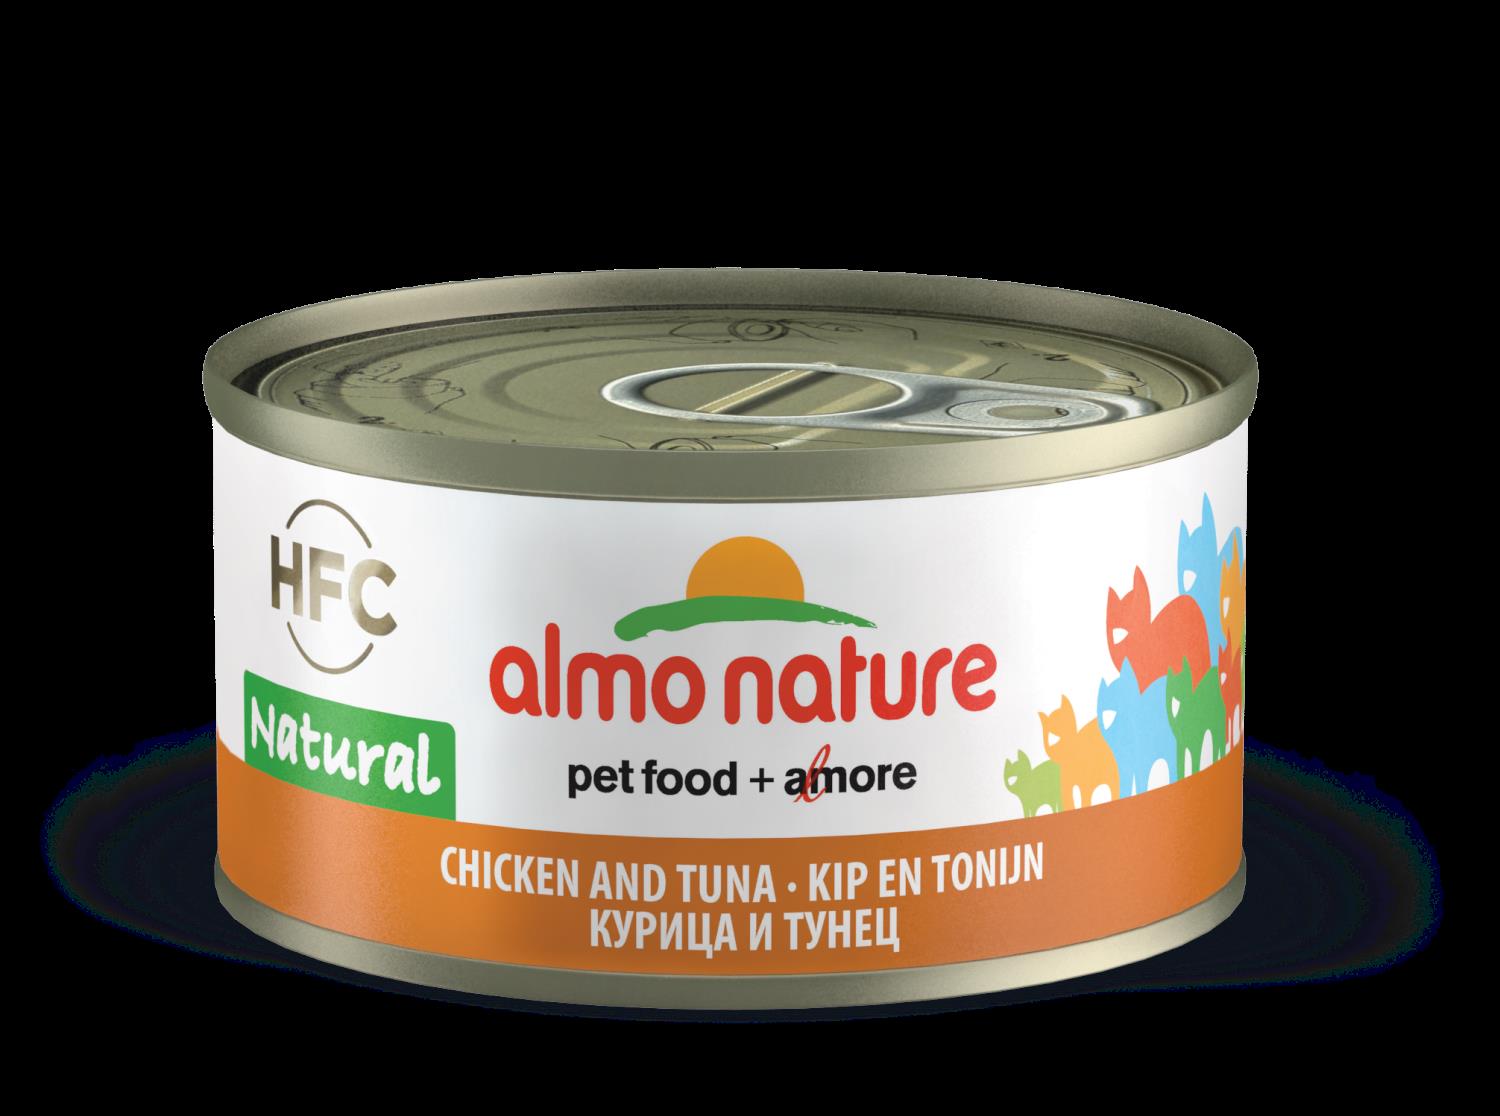 Kylling & Tunfisk 70gr, Almo Nature (24)